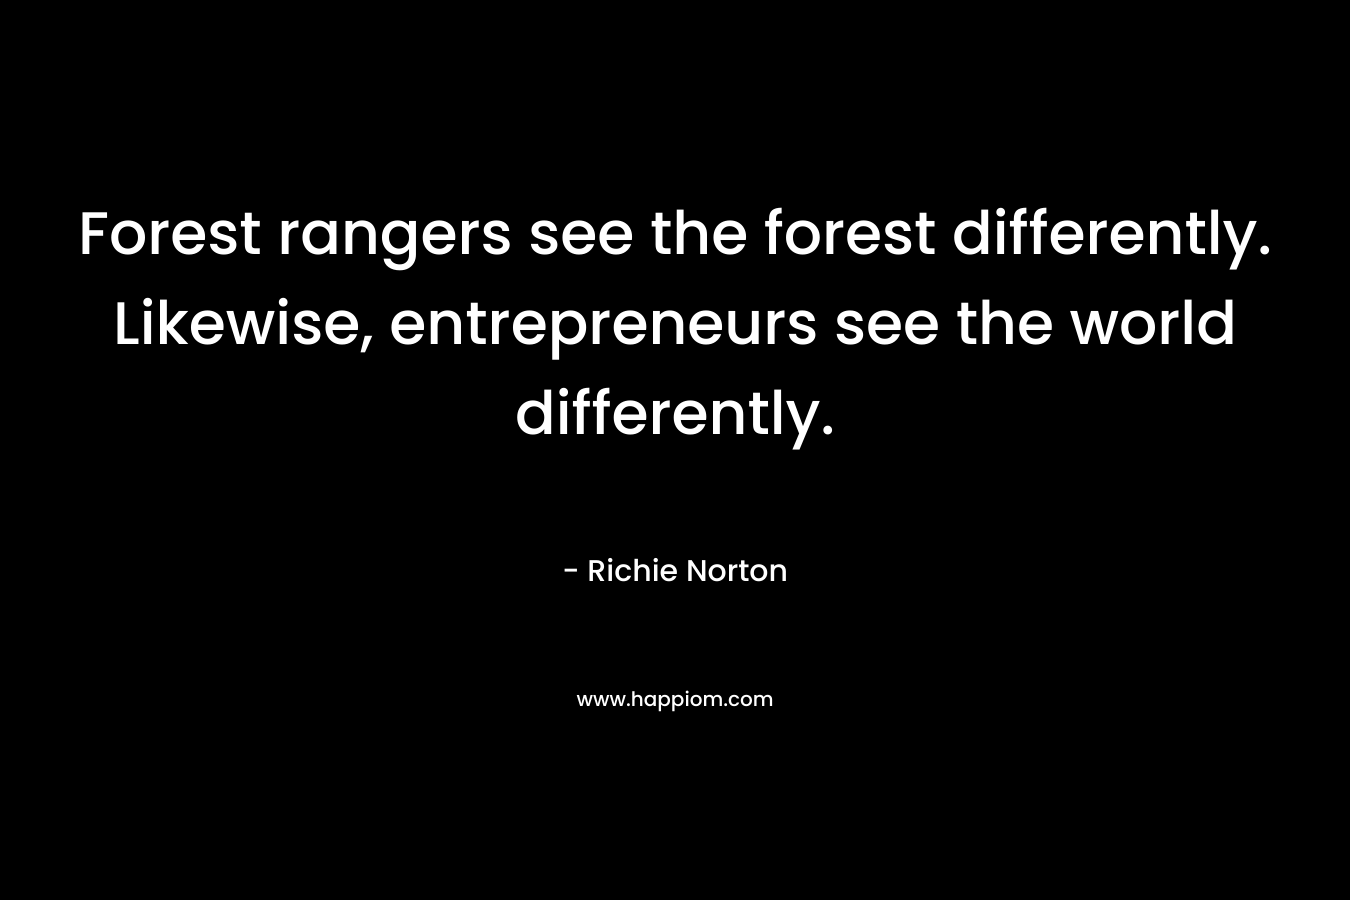 Forest rangers see the forest differently. Likewise, entrepreneurs see the world differently.